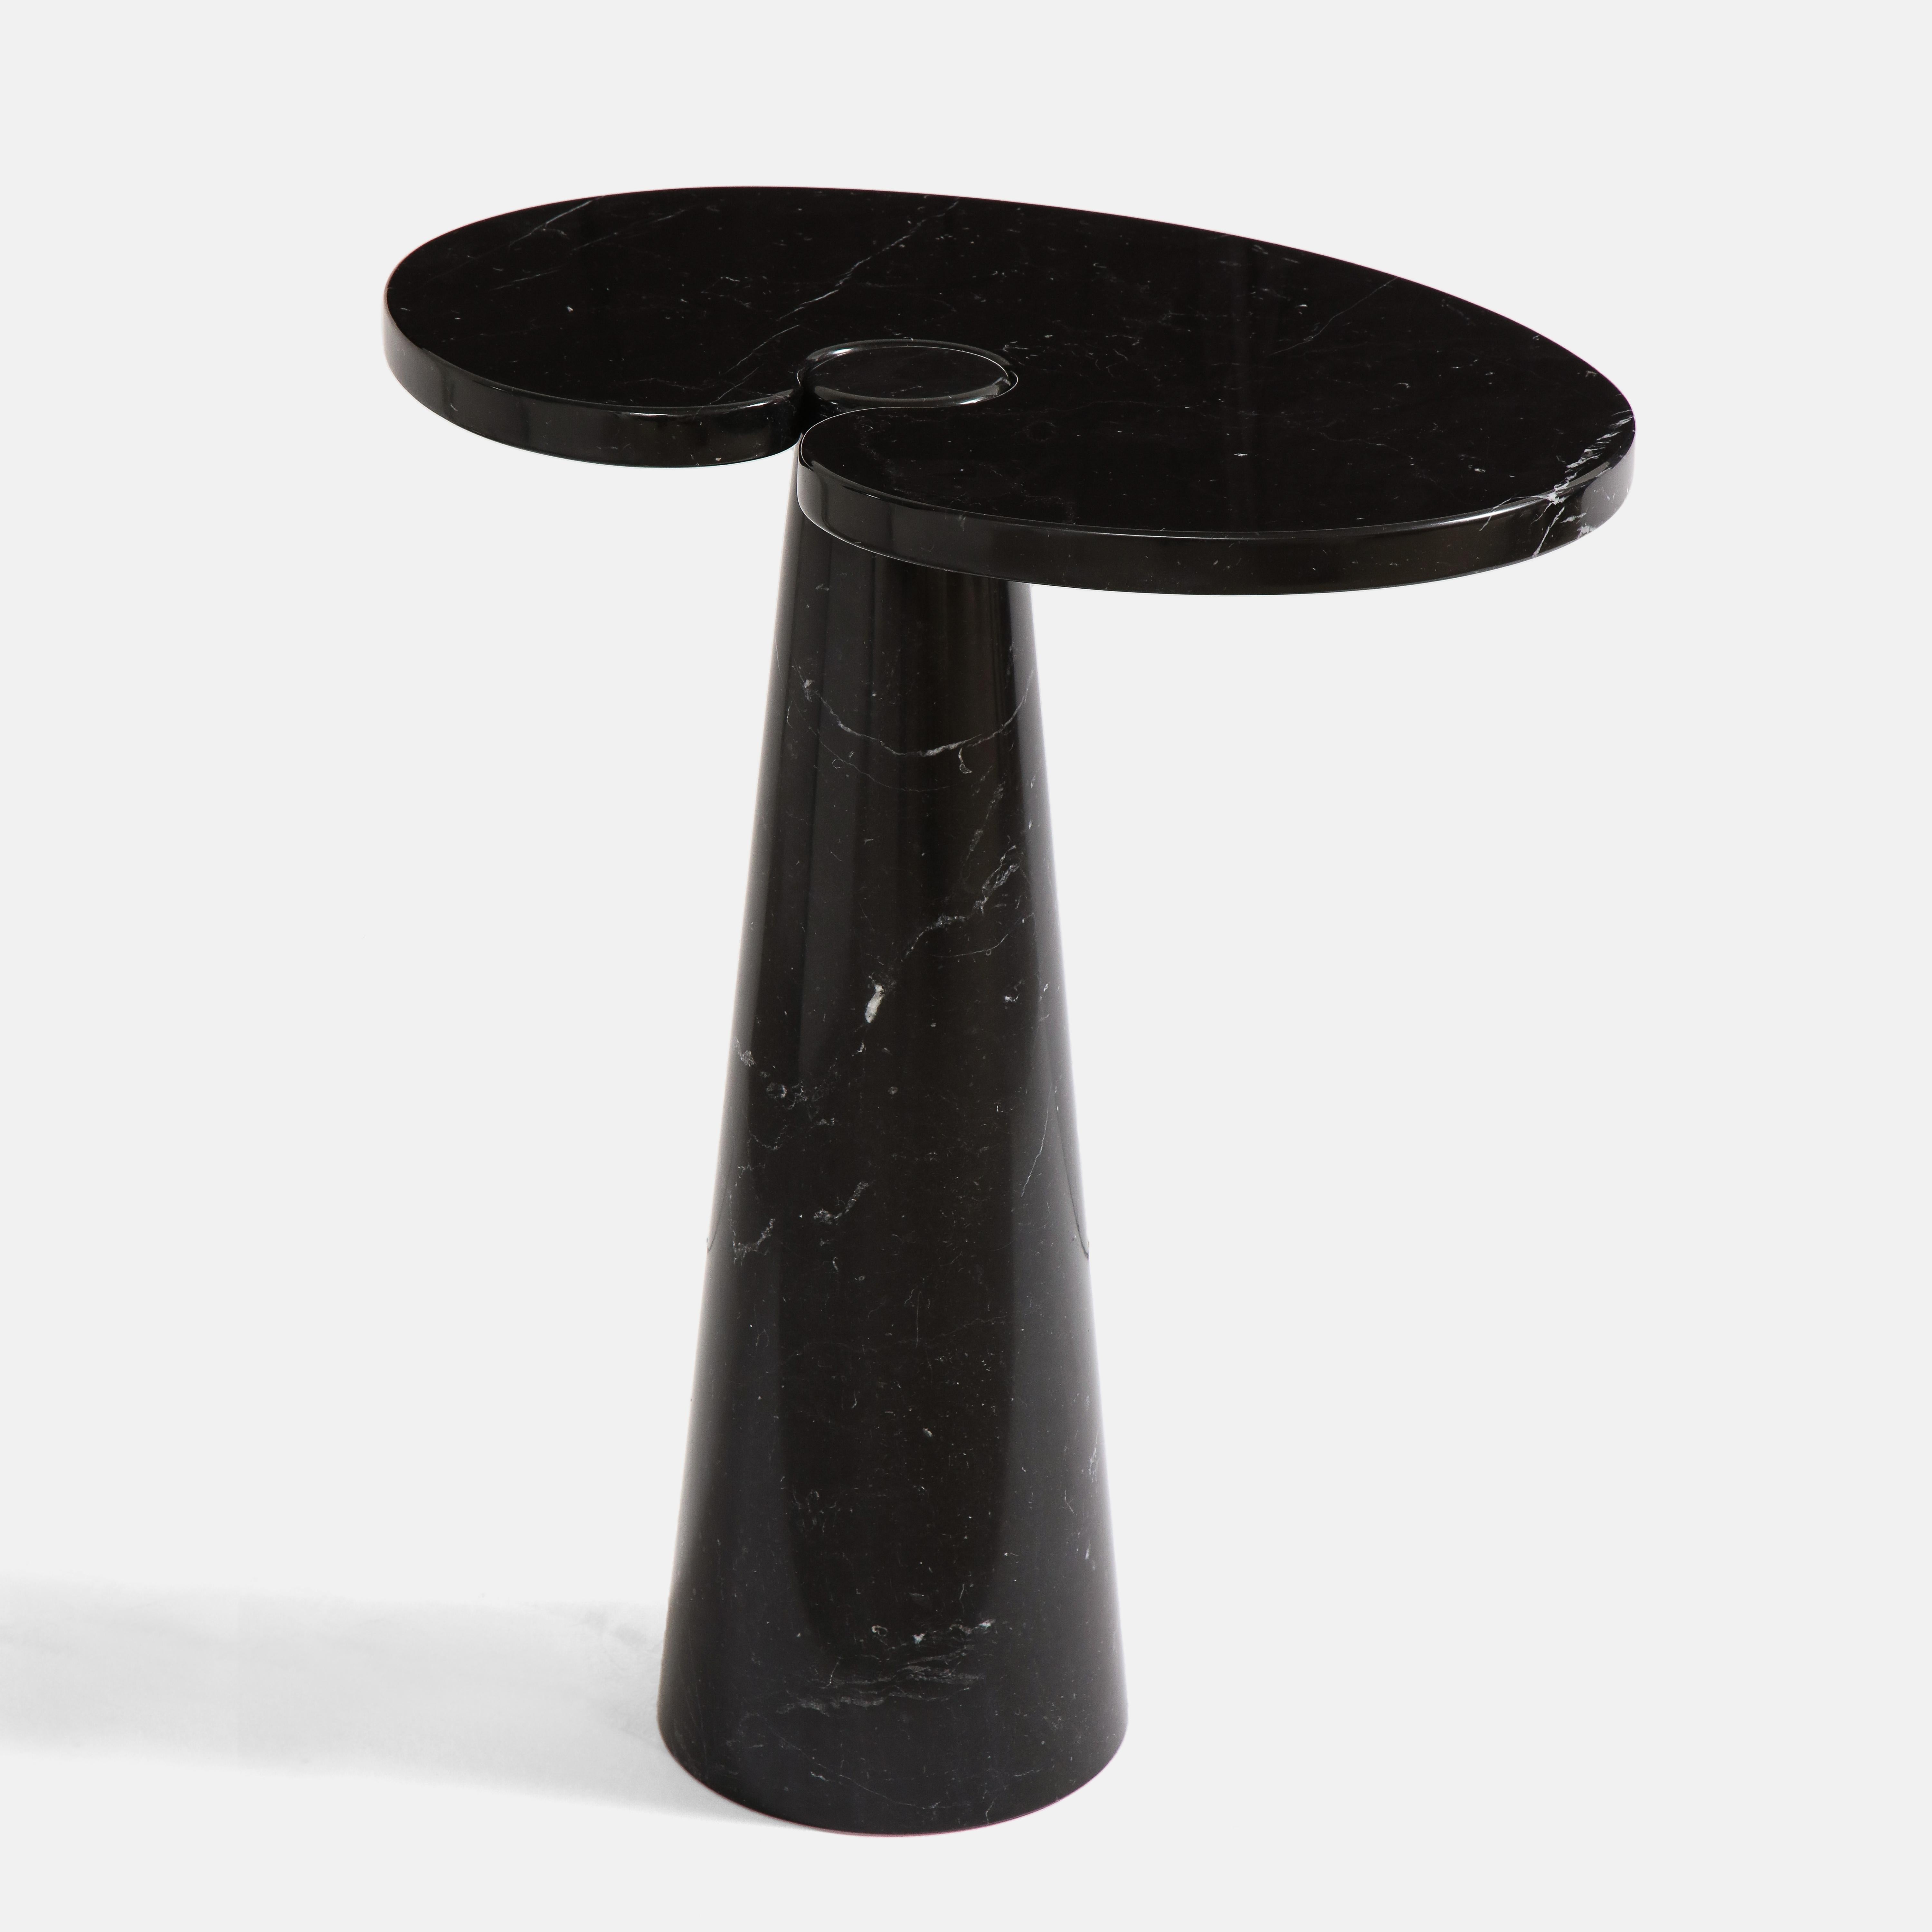 Designed by Angelo Mangiarotti for Skipper from the 'Eros' series, black Marquina marble tall side table or small console table with top fitted on conical base. This elegantly organic table has beautiful subtle veining throughout.  It's from the